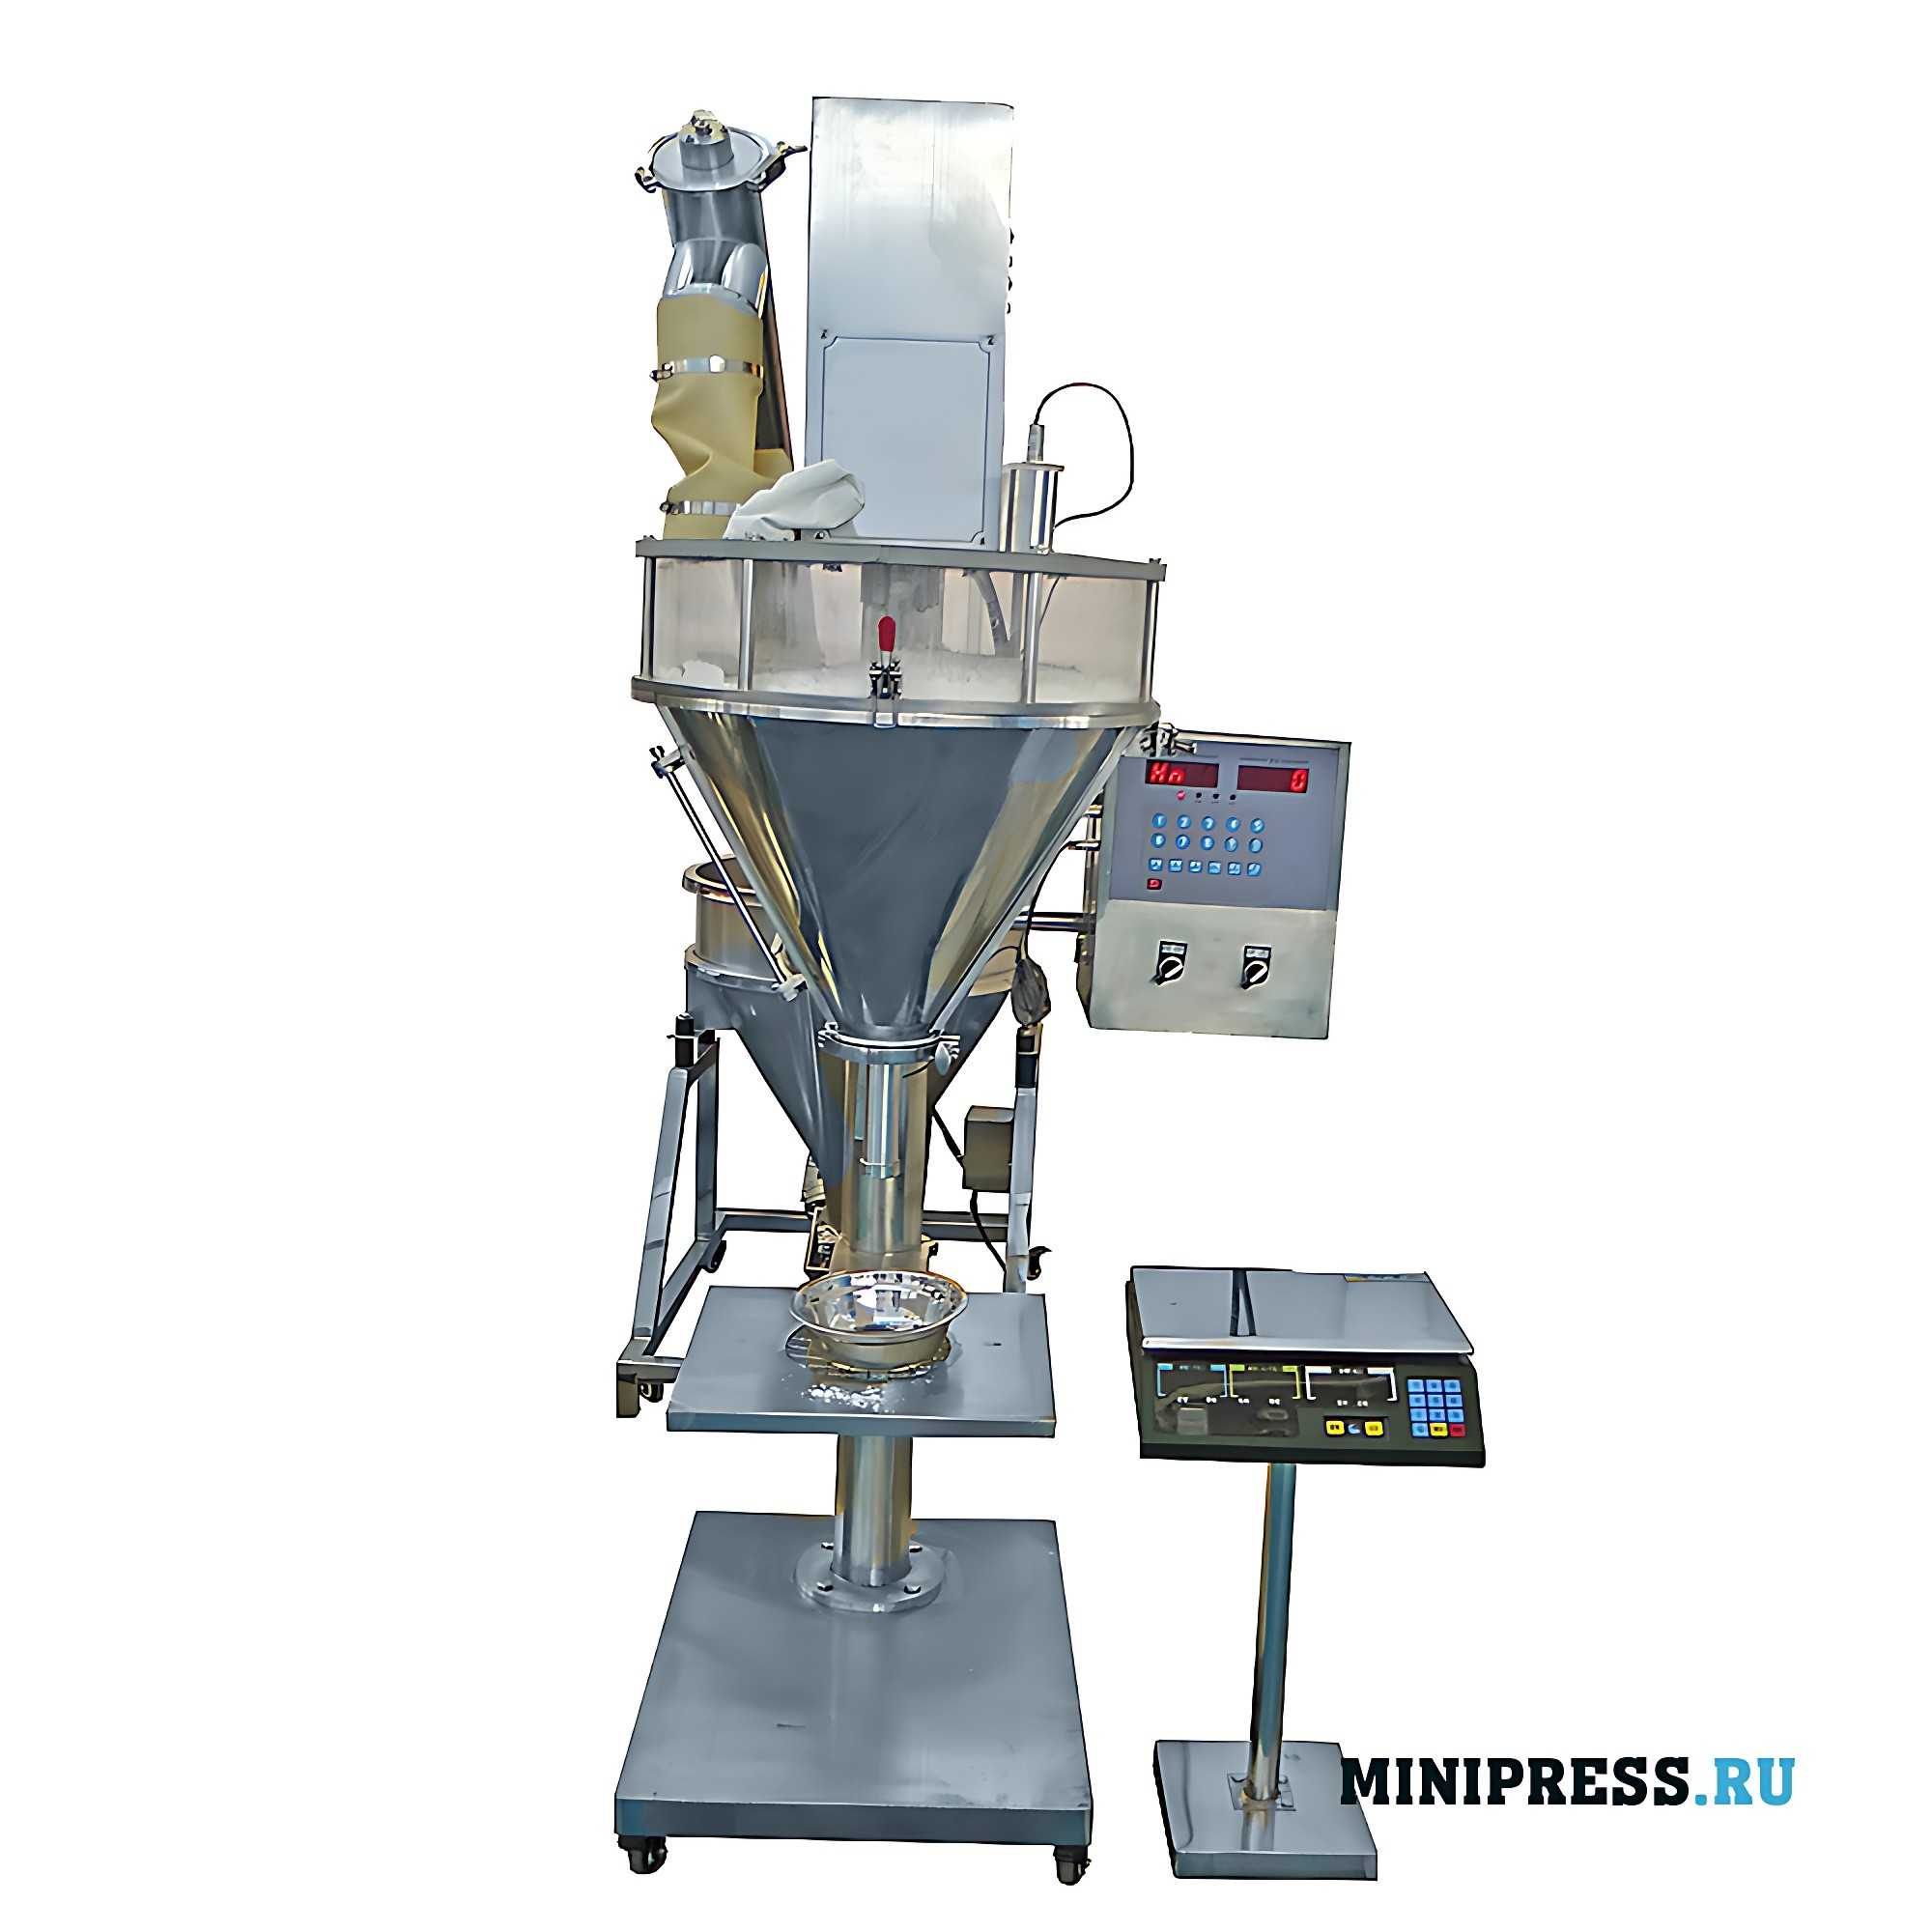 Powder dosing and filling machine FP-50